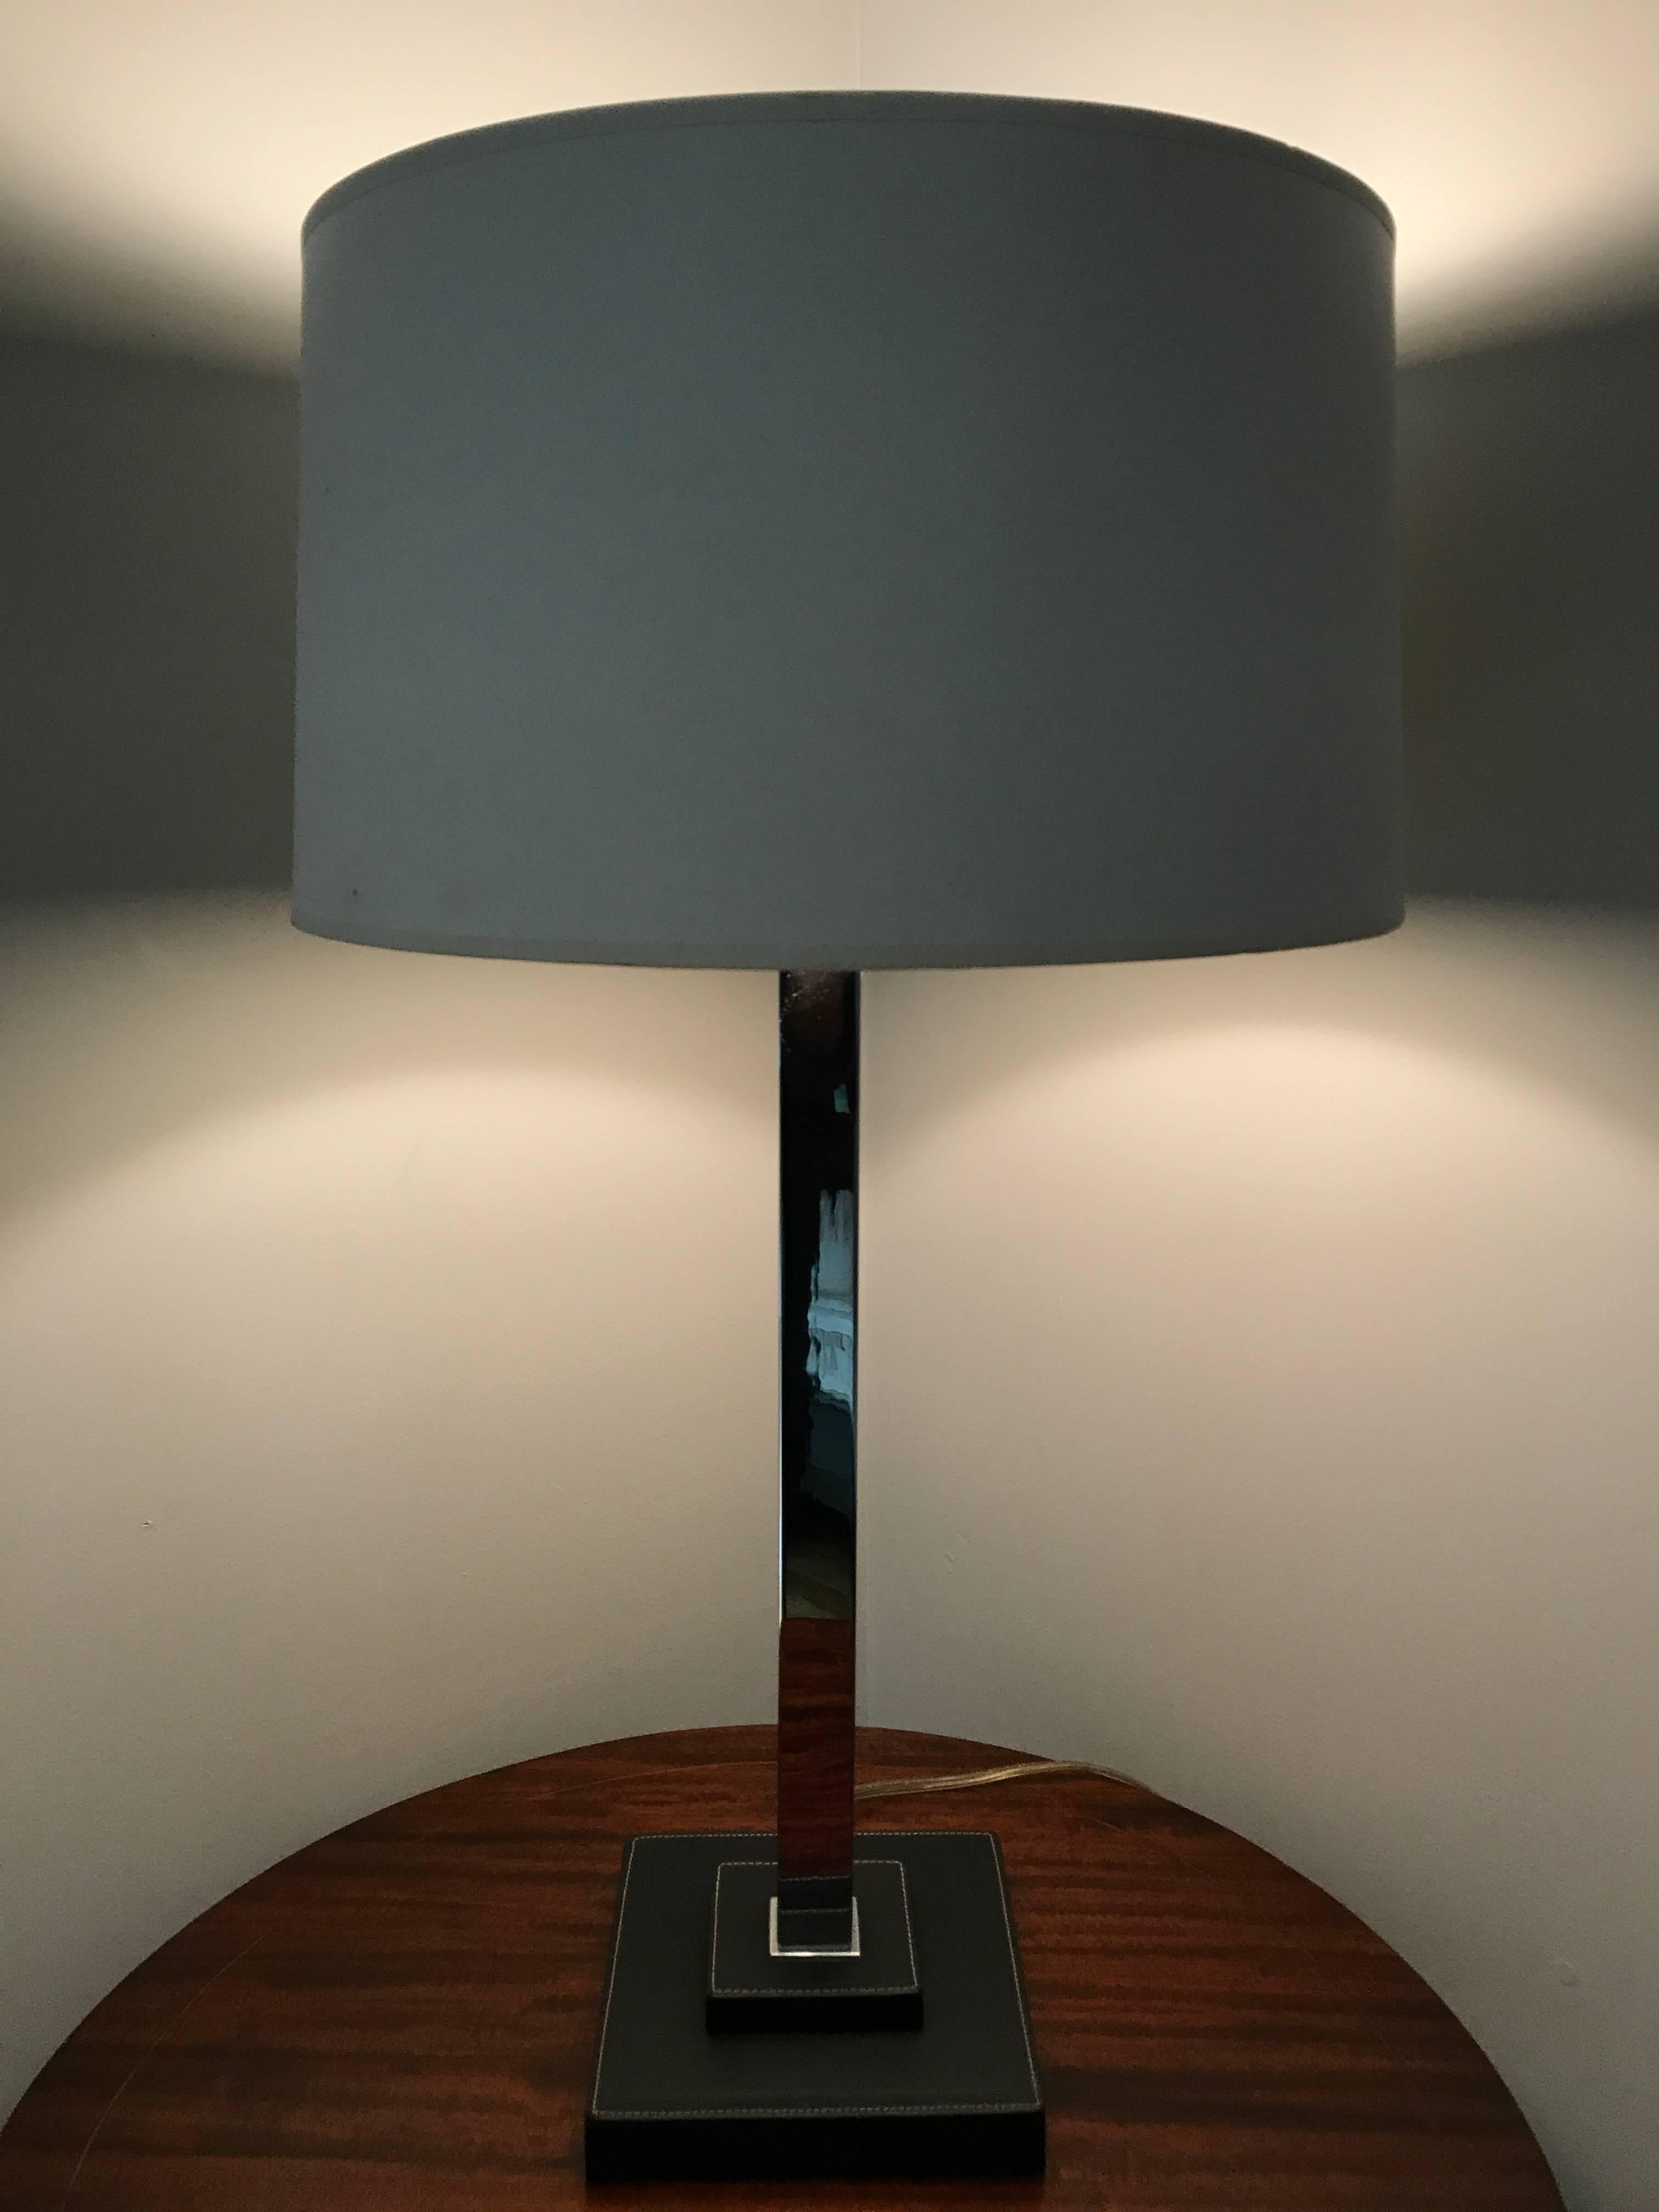 Pair of Nessen Studios table lamps with stitched leather base and chrome body. Shade for display purposes only.